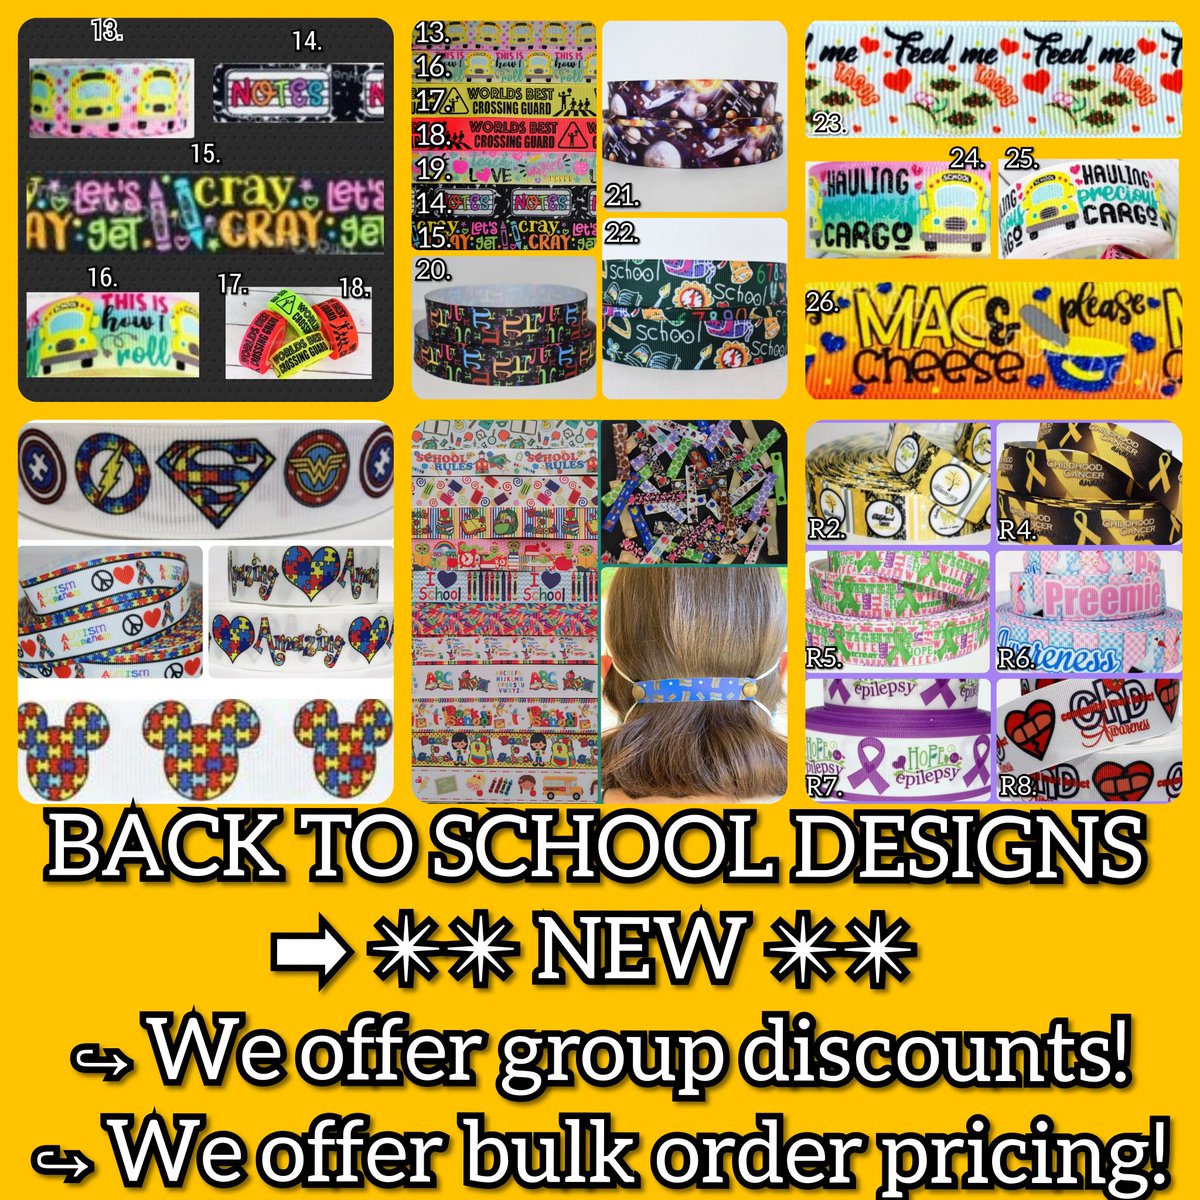 ClassyLeatherAndLace.etsy.com
NEWvEAR SAVERS FOR FACEMASK DESIGNS! Works w/cochlear implants/hearing aids!
▶TEACHER, BUS DRIVER, CAFETERIA & MORE
etsy.com/listing/834254…
#COVID19 #BackToSchool #SaveOurChildren #teachertwitter #teaching #school #SpecialEducation #mondaythoughts #Monday